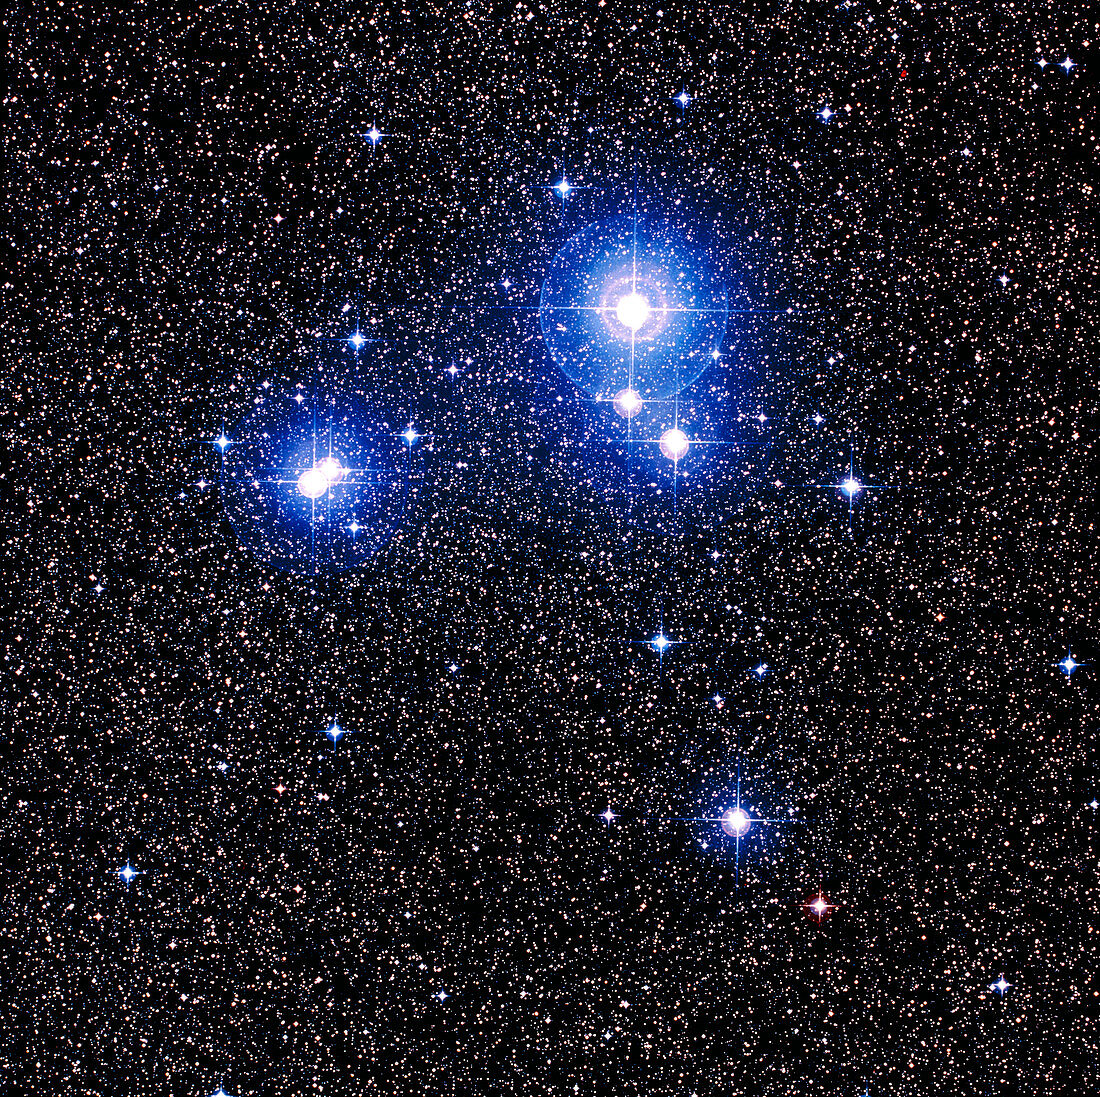 Optical image of the star cluster IC 2391 in Vela